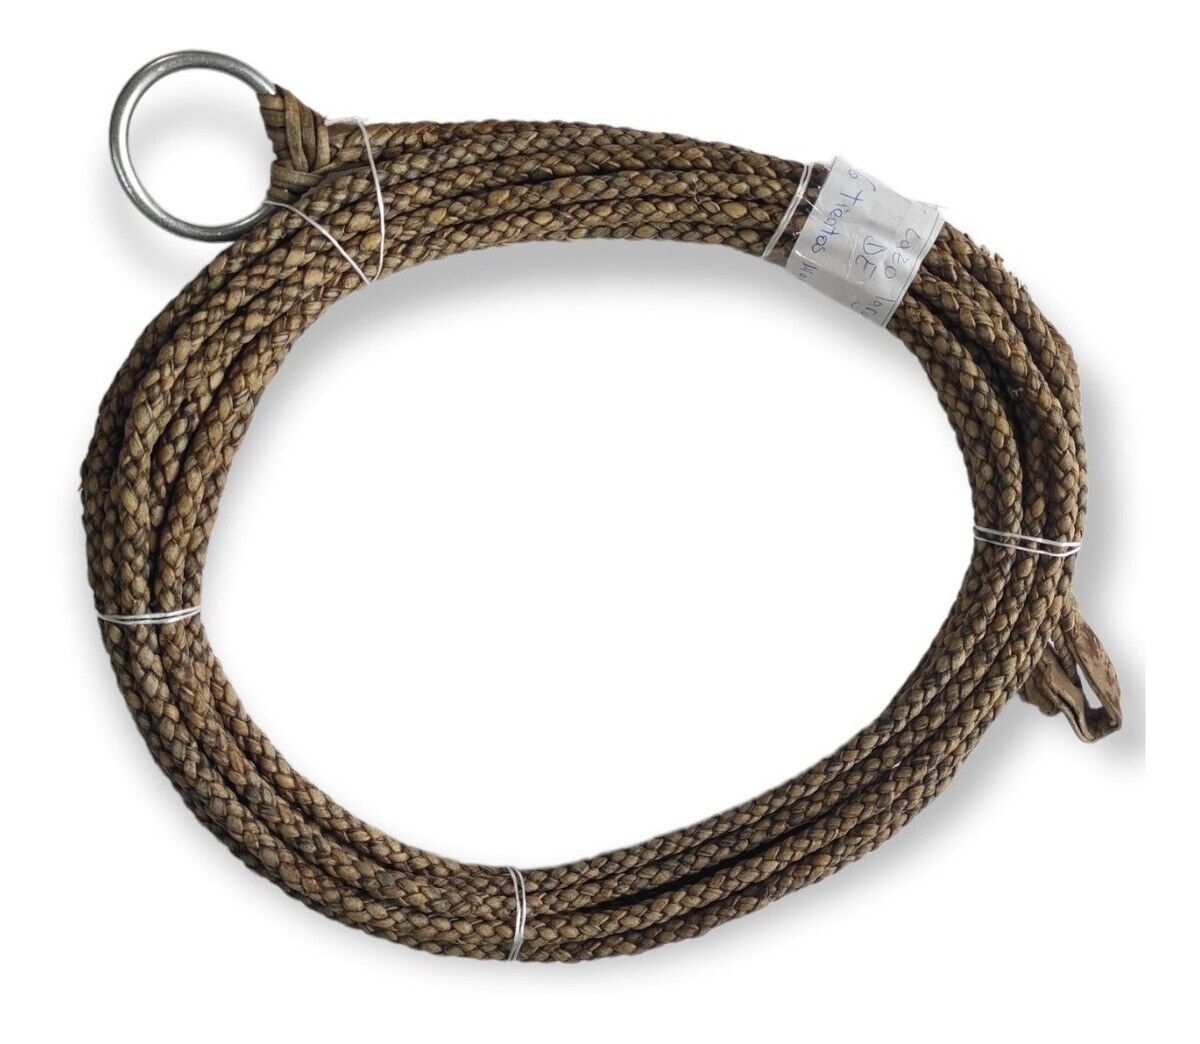 BRAIDED RAWHIDE 46' LARIAT Lasso Rodeo Ranch Argentinian Gaucho Leather Western